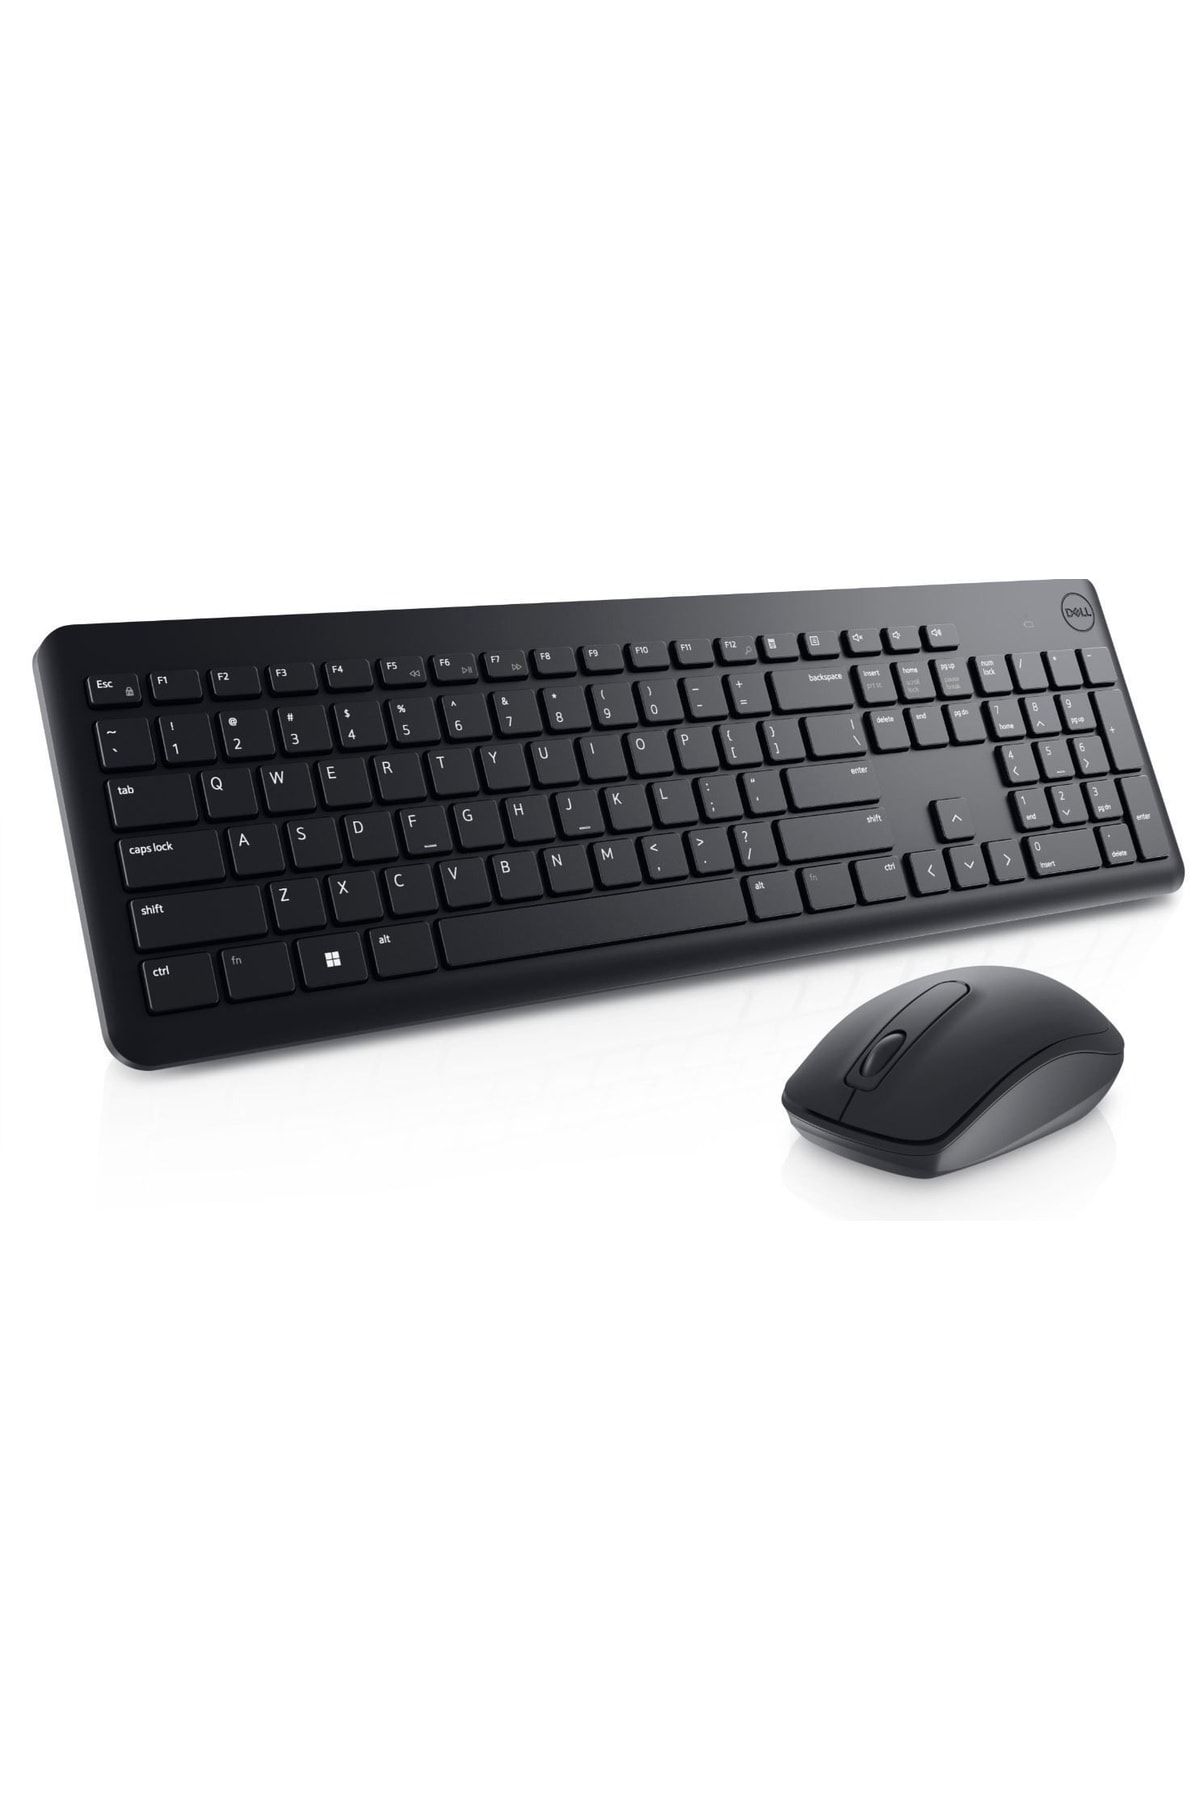 Dell 580-akgı Wireless Keyboard And Mouse-km3322w Turkish Qwerty